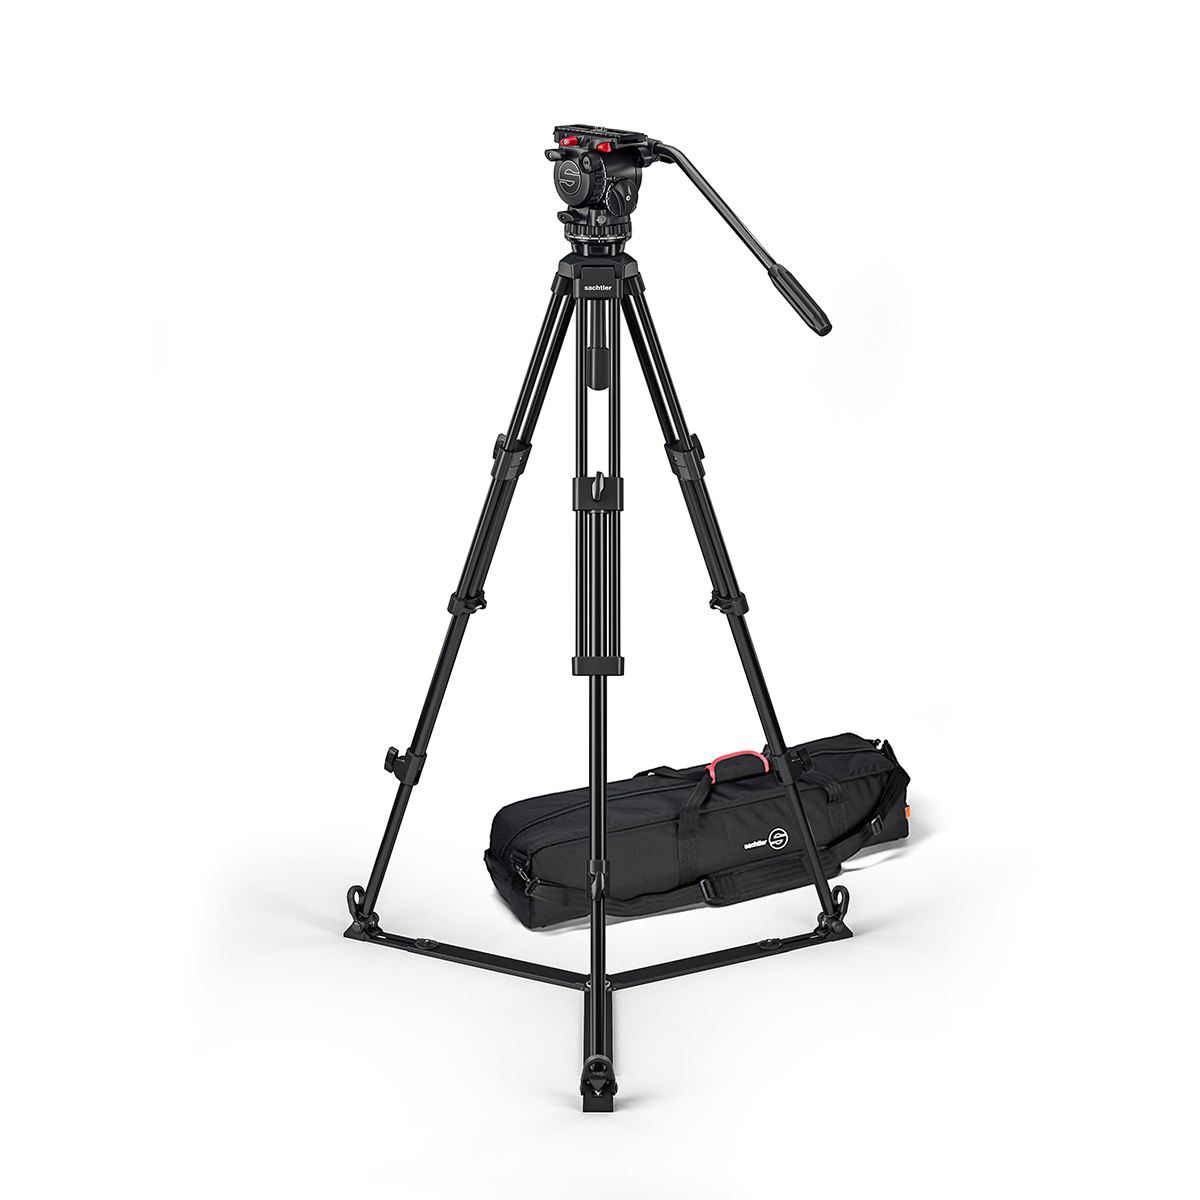 Picture of Sachtler SACH-0771AM MK II Tripod Head System with Ground Spreader & Padded Bag